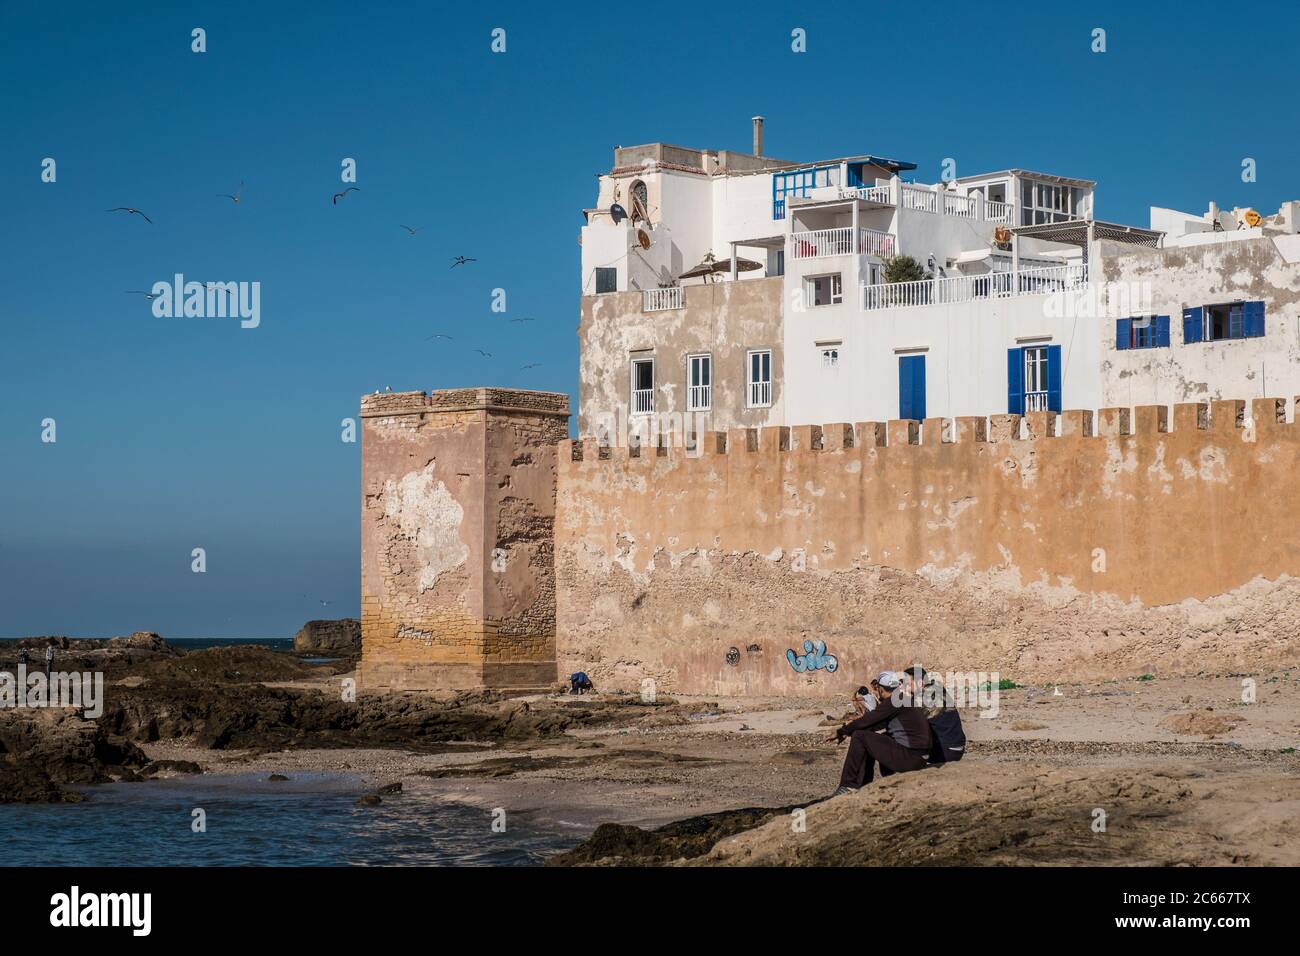 Men sitting on rocks in the sea in front of the city walls of Essaouira Stock Photo